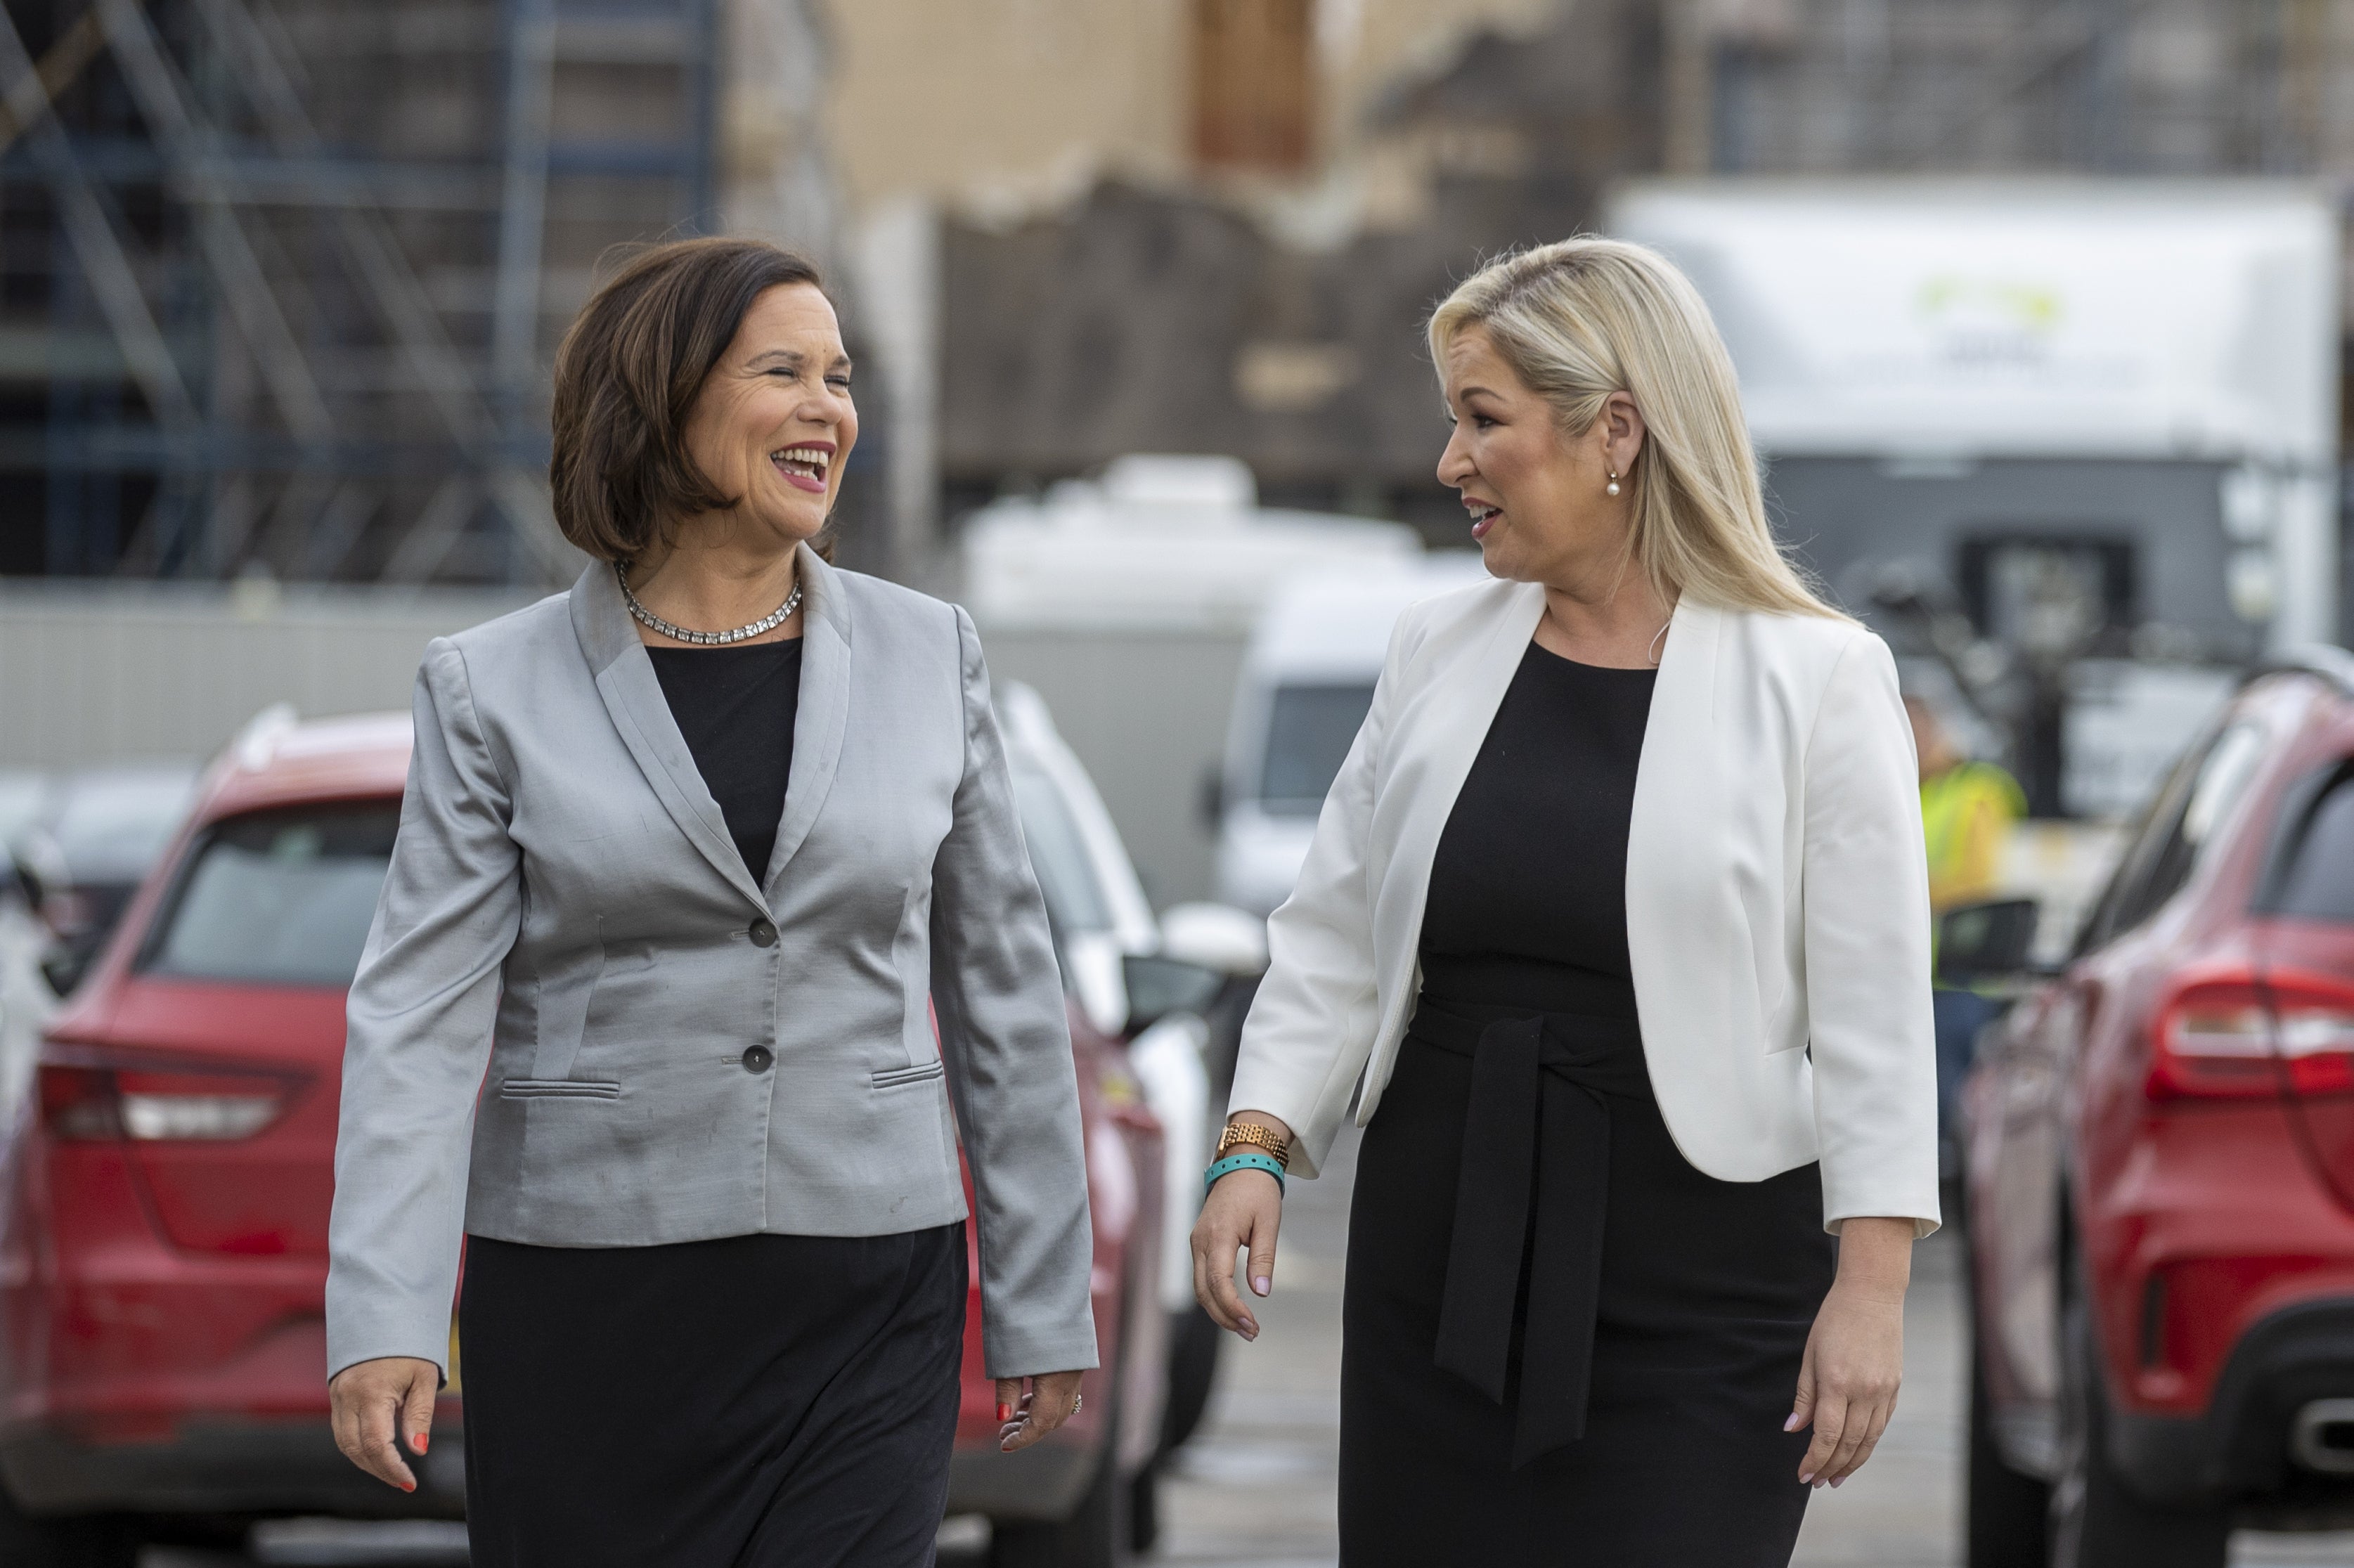 Sinn Fein President Mary Lou McDonald (left) arrives with Vice-President Michelle O’Neill (right) to the Titanic Exhibition Centre in Belfast, as counting continues for the Northern Ireland Assembly. (Liam McBurney/PA)